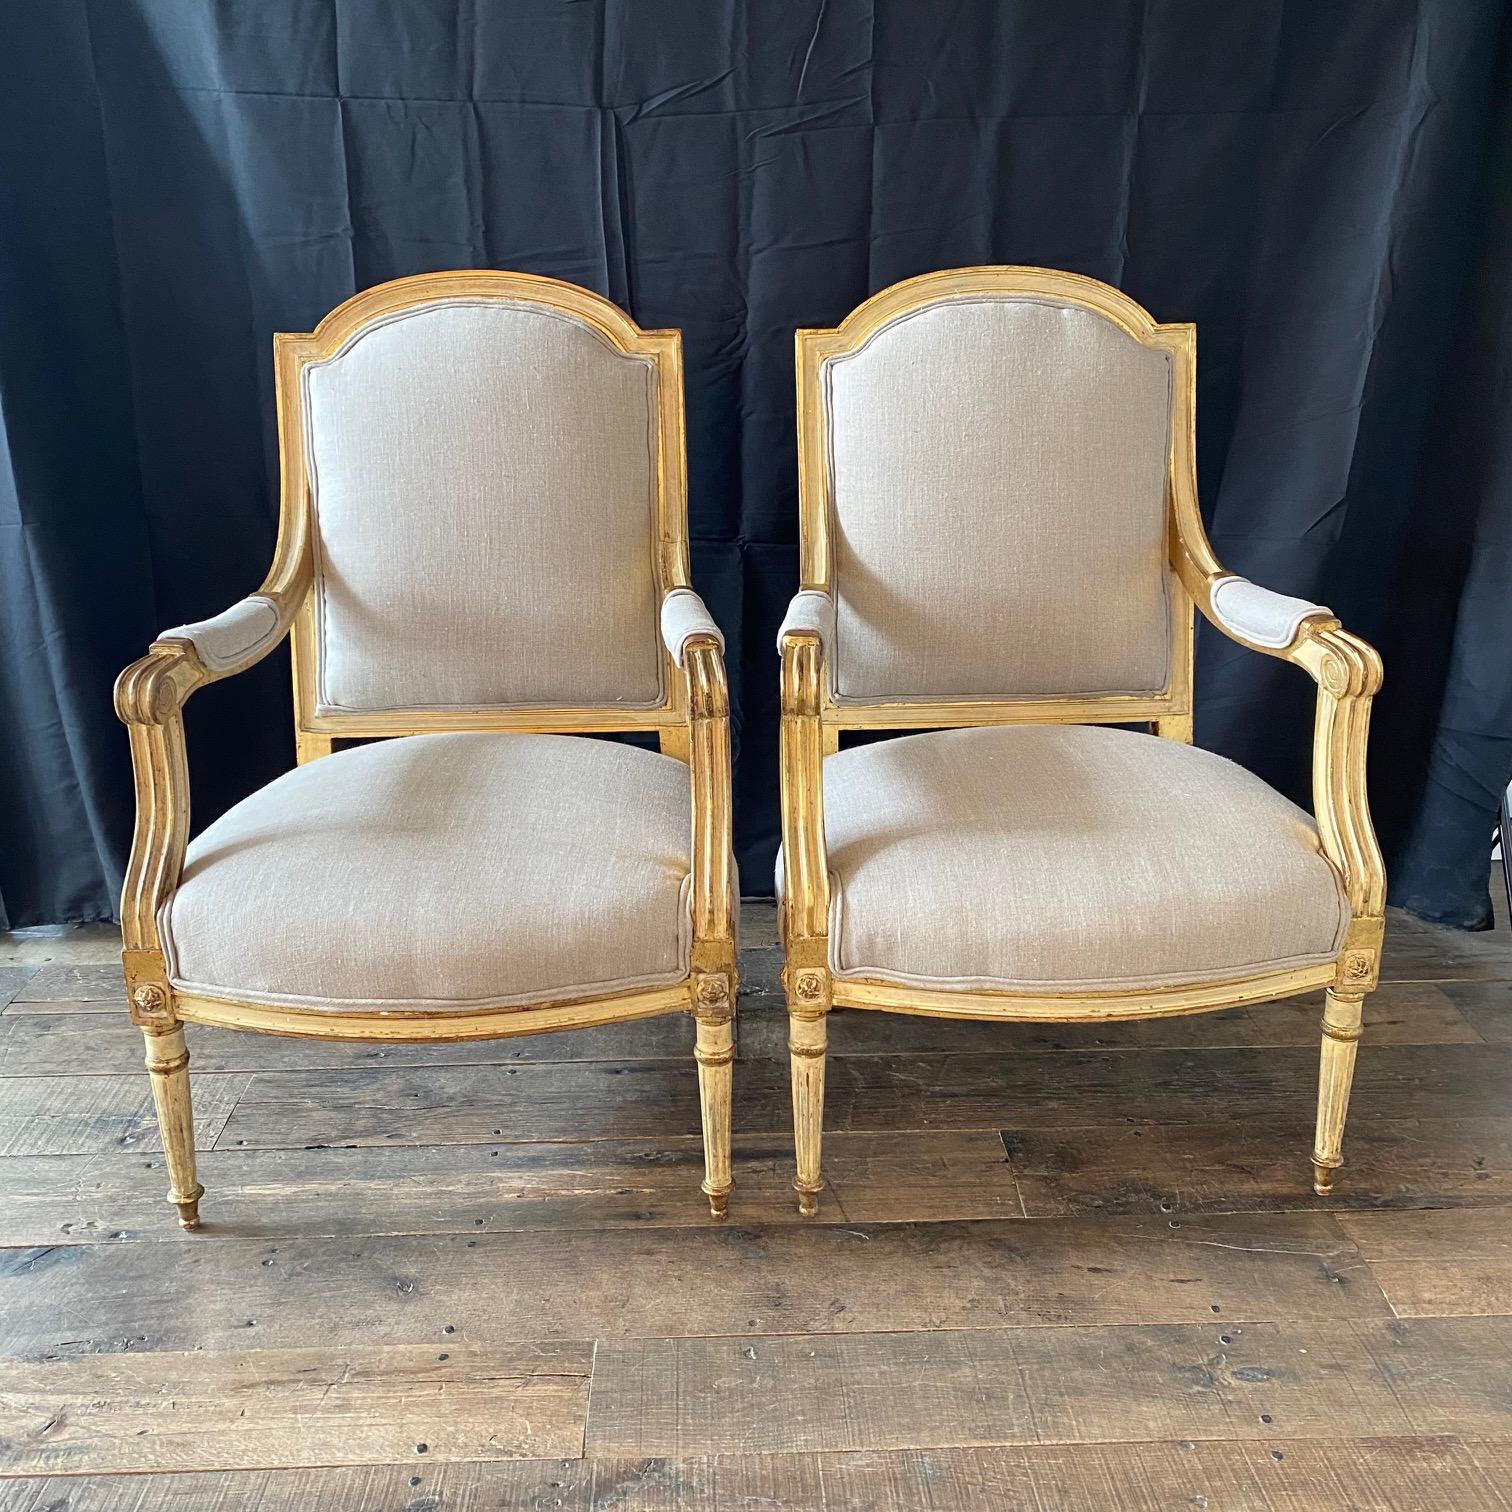 Pair of French Louis XVI Neoclassical Gold Gilt Painted Armchairs In Good Condition For Sale In Hopewell, NJ